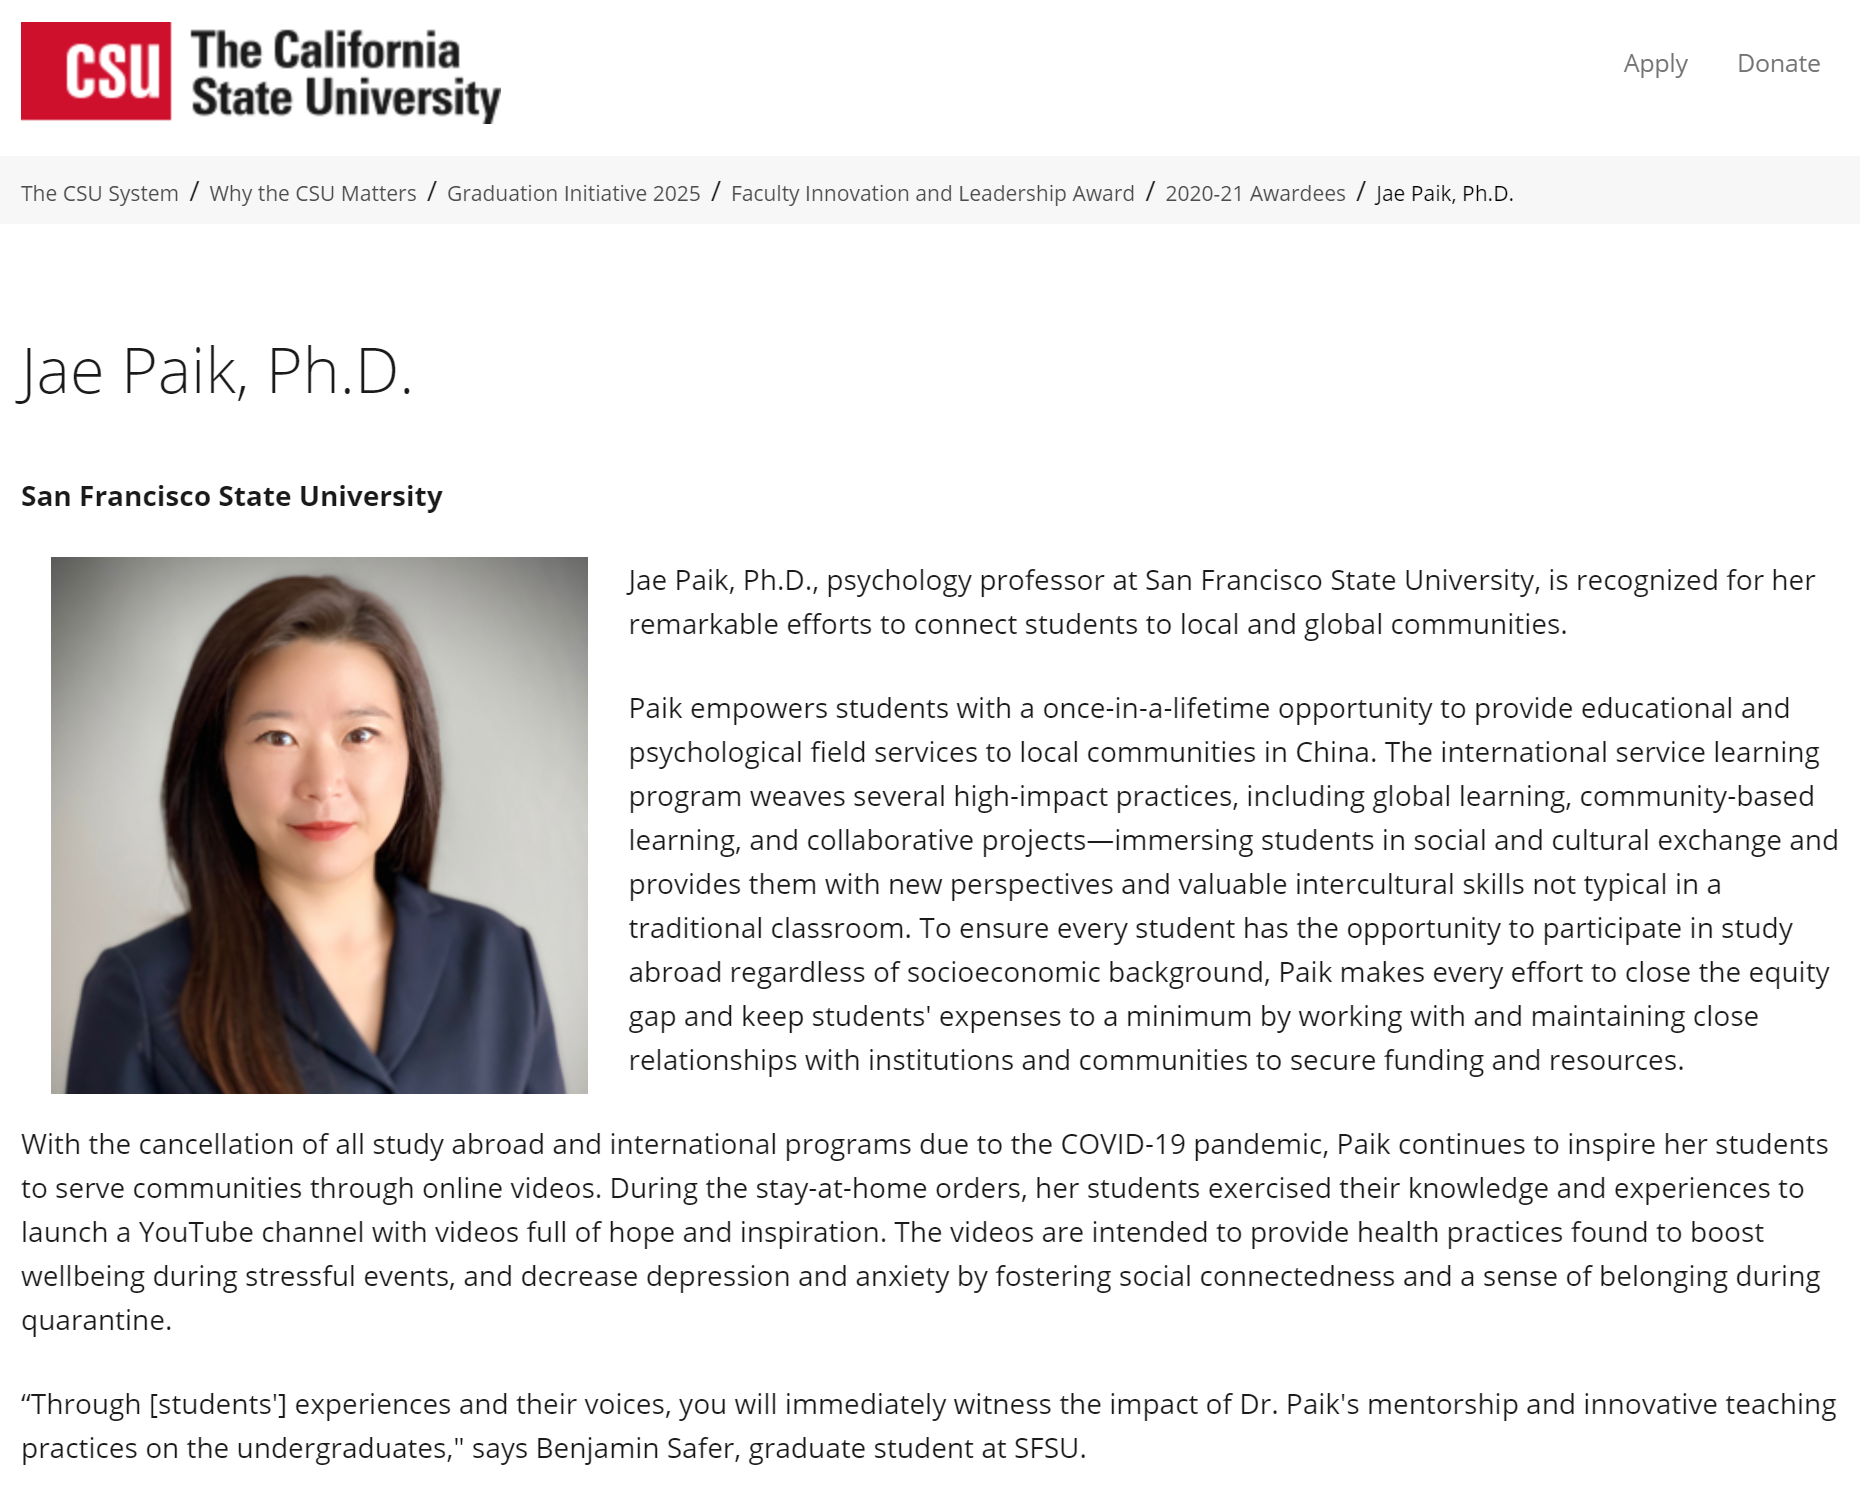 Dr. Paik Faculty Innovation Award Nomination and Acceptance